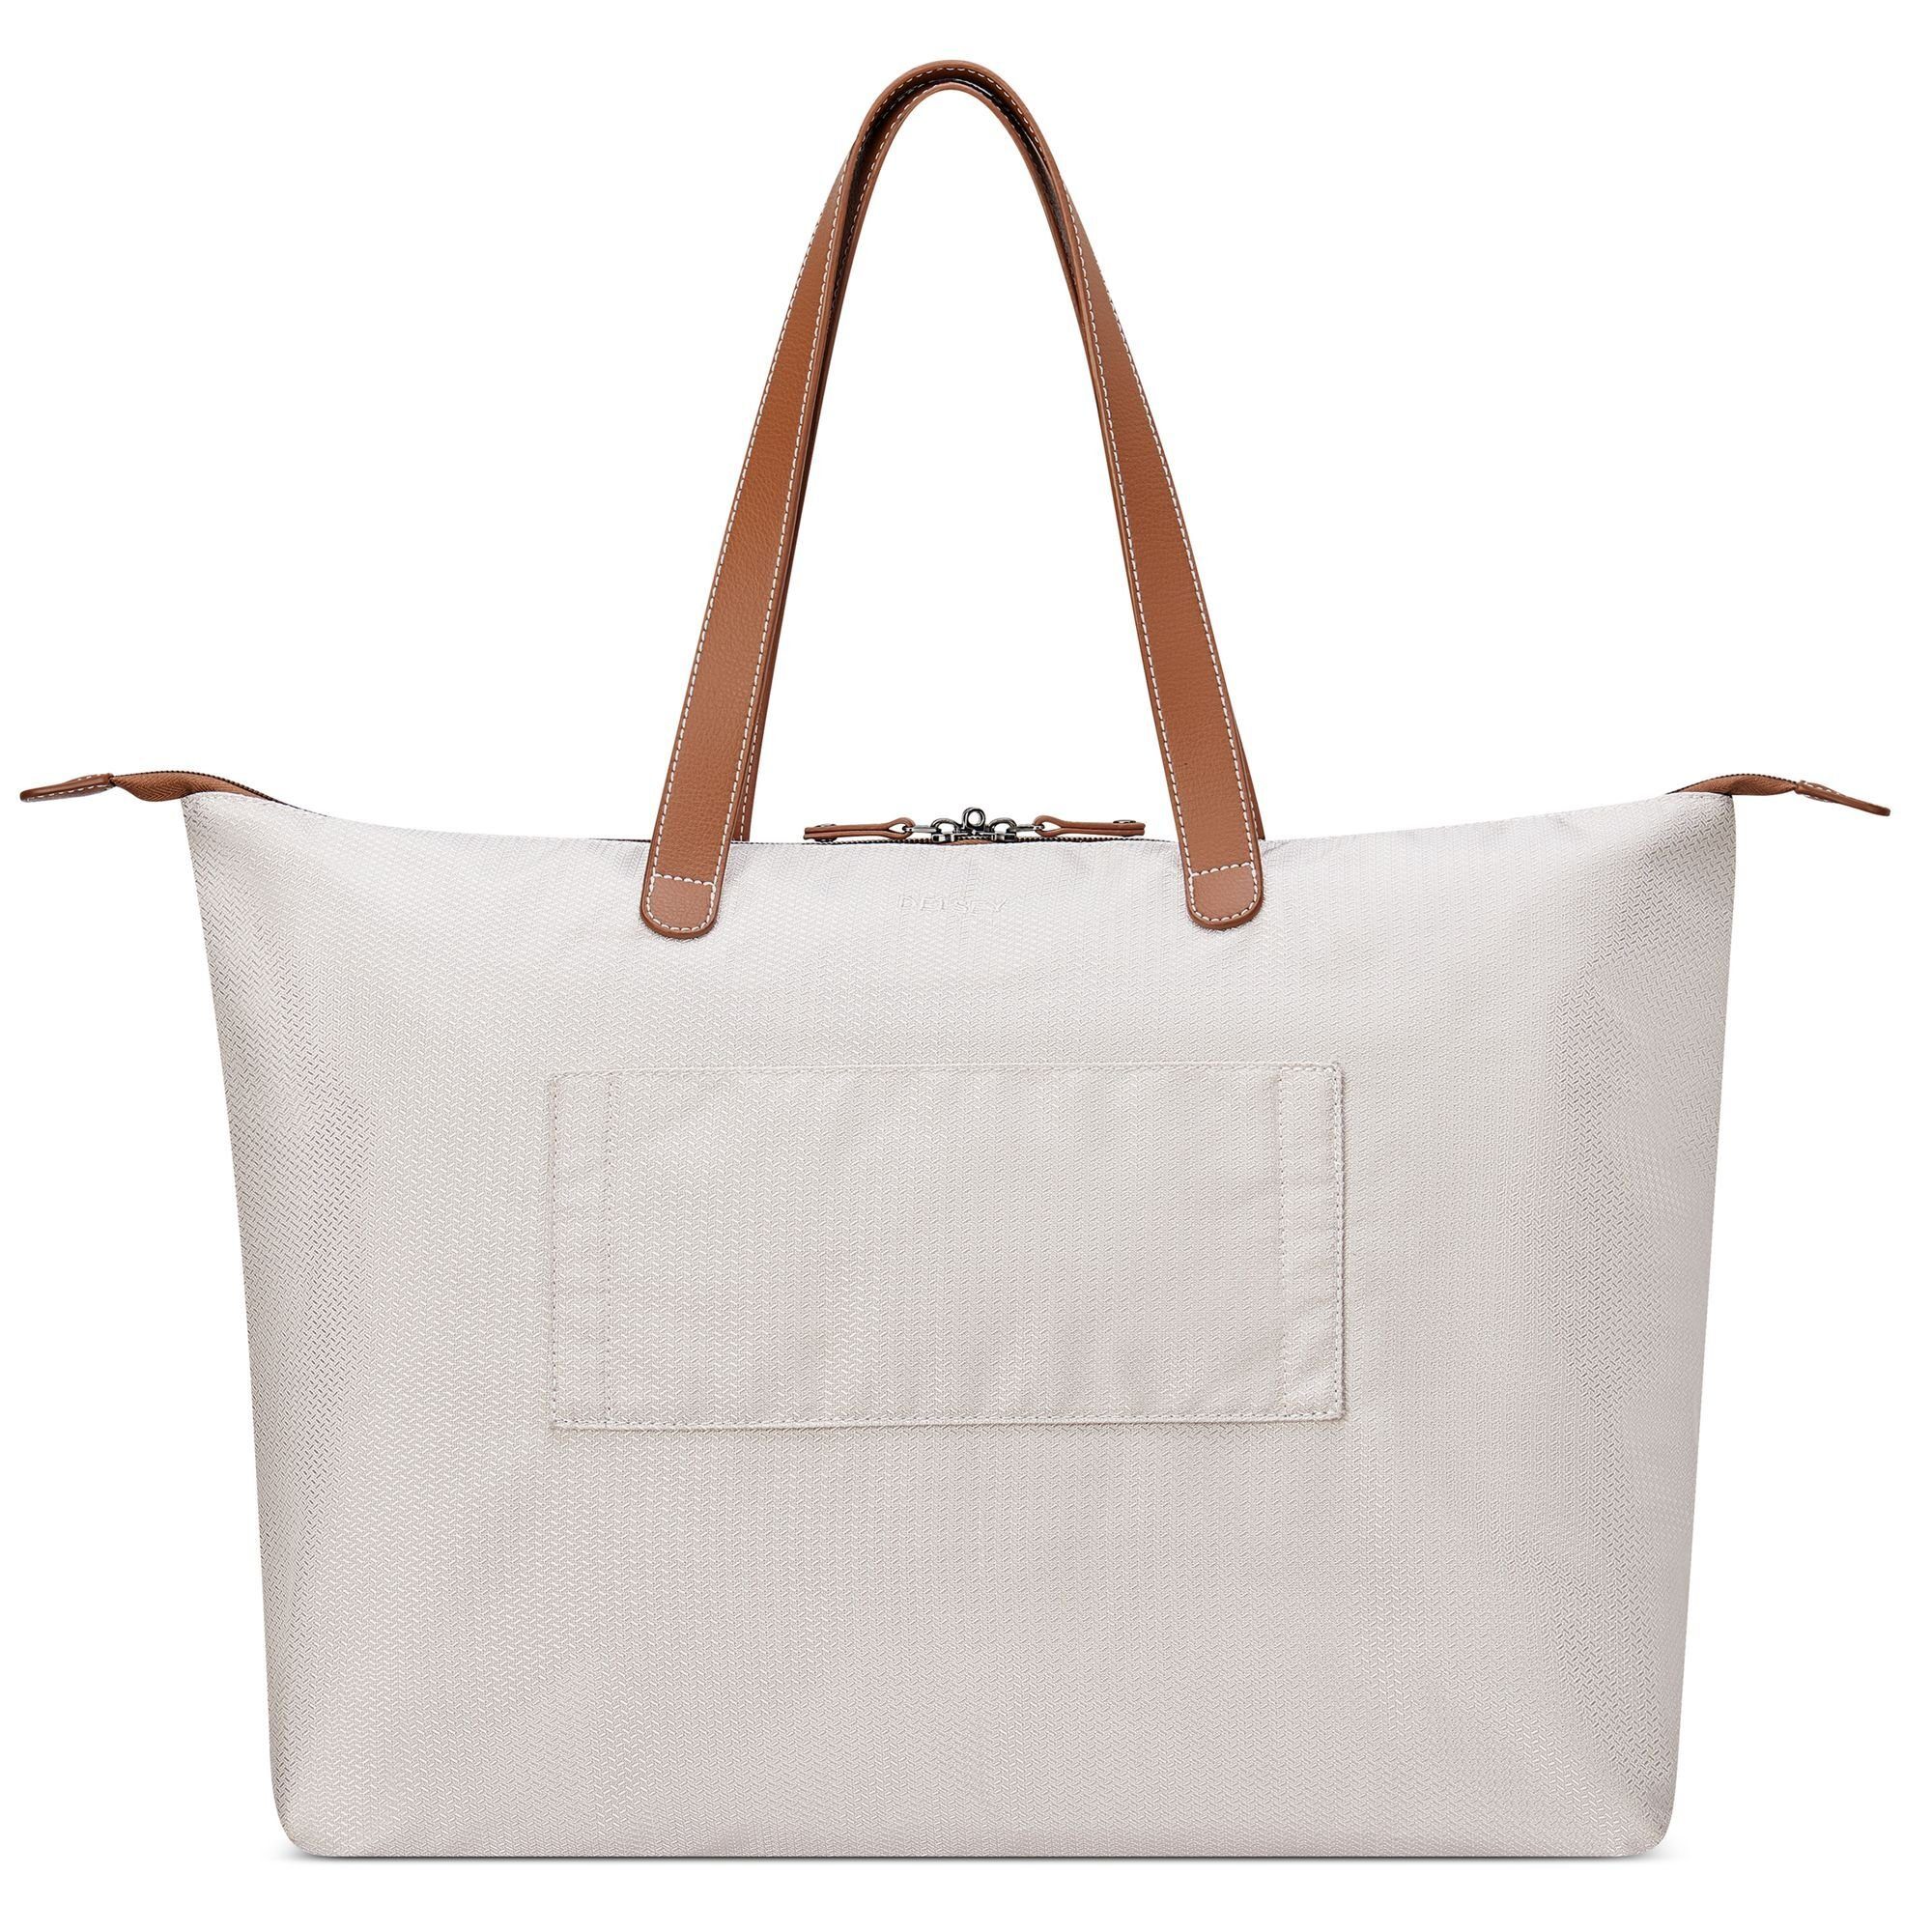 angora Weekender Air Polyester 2.0, Chatelet Delsey